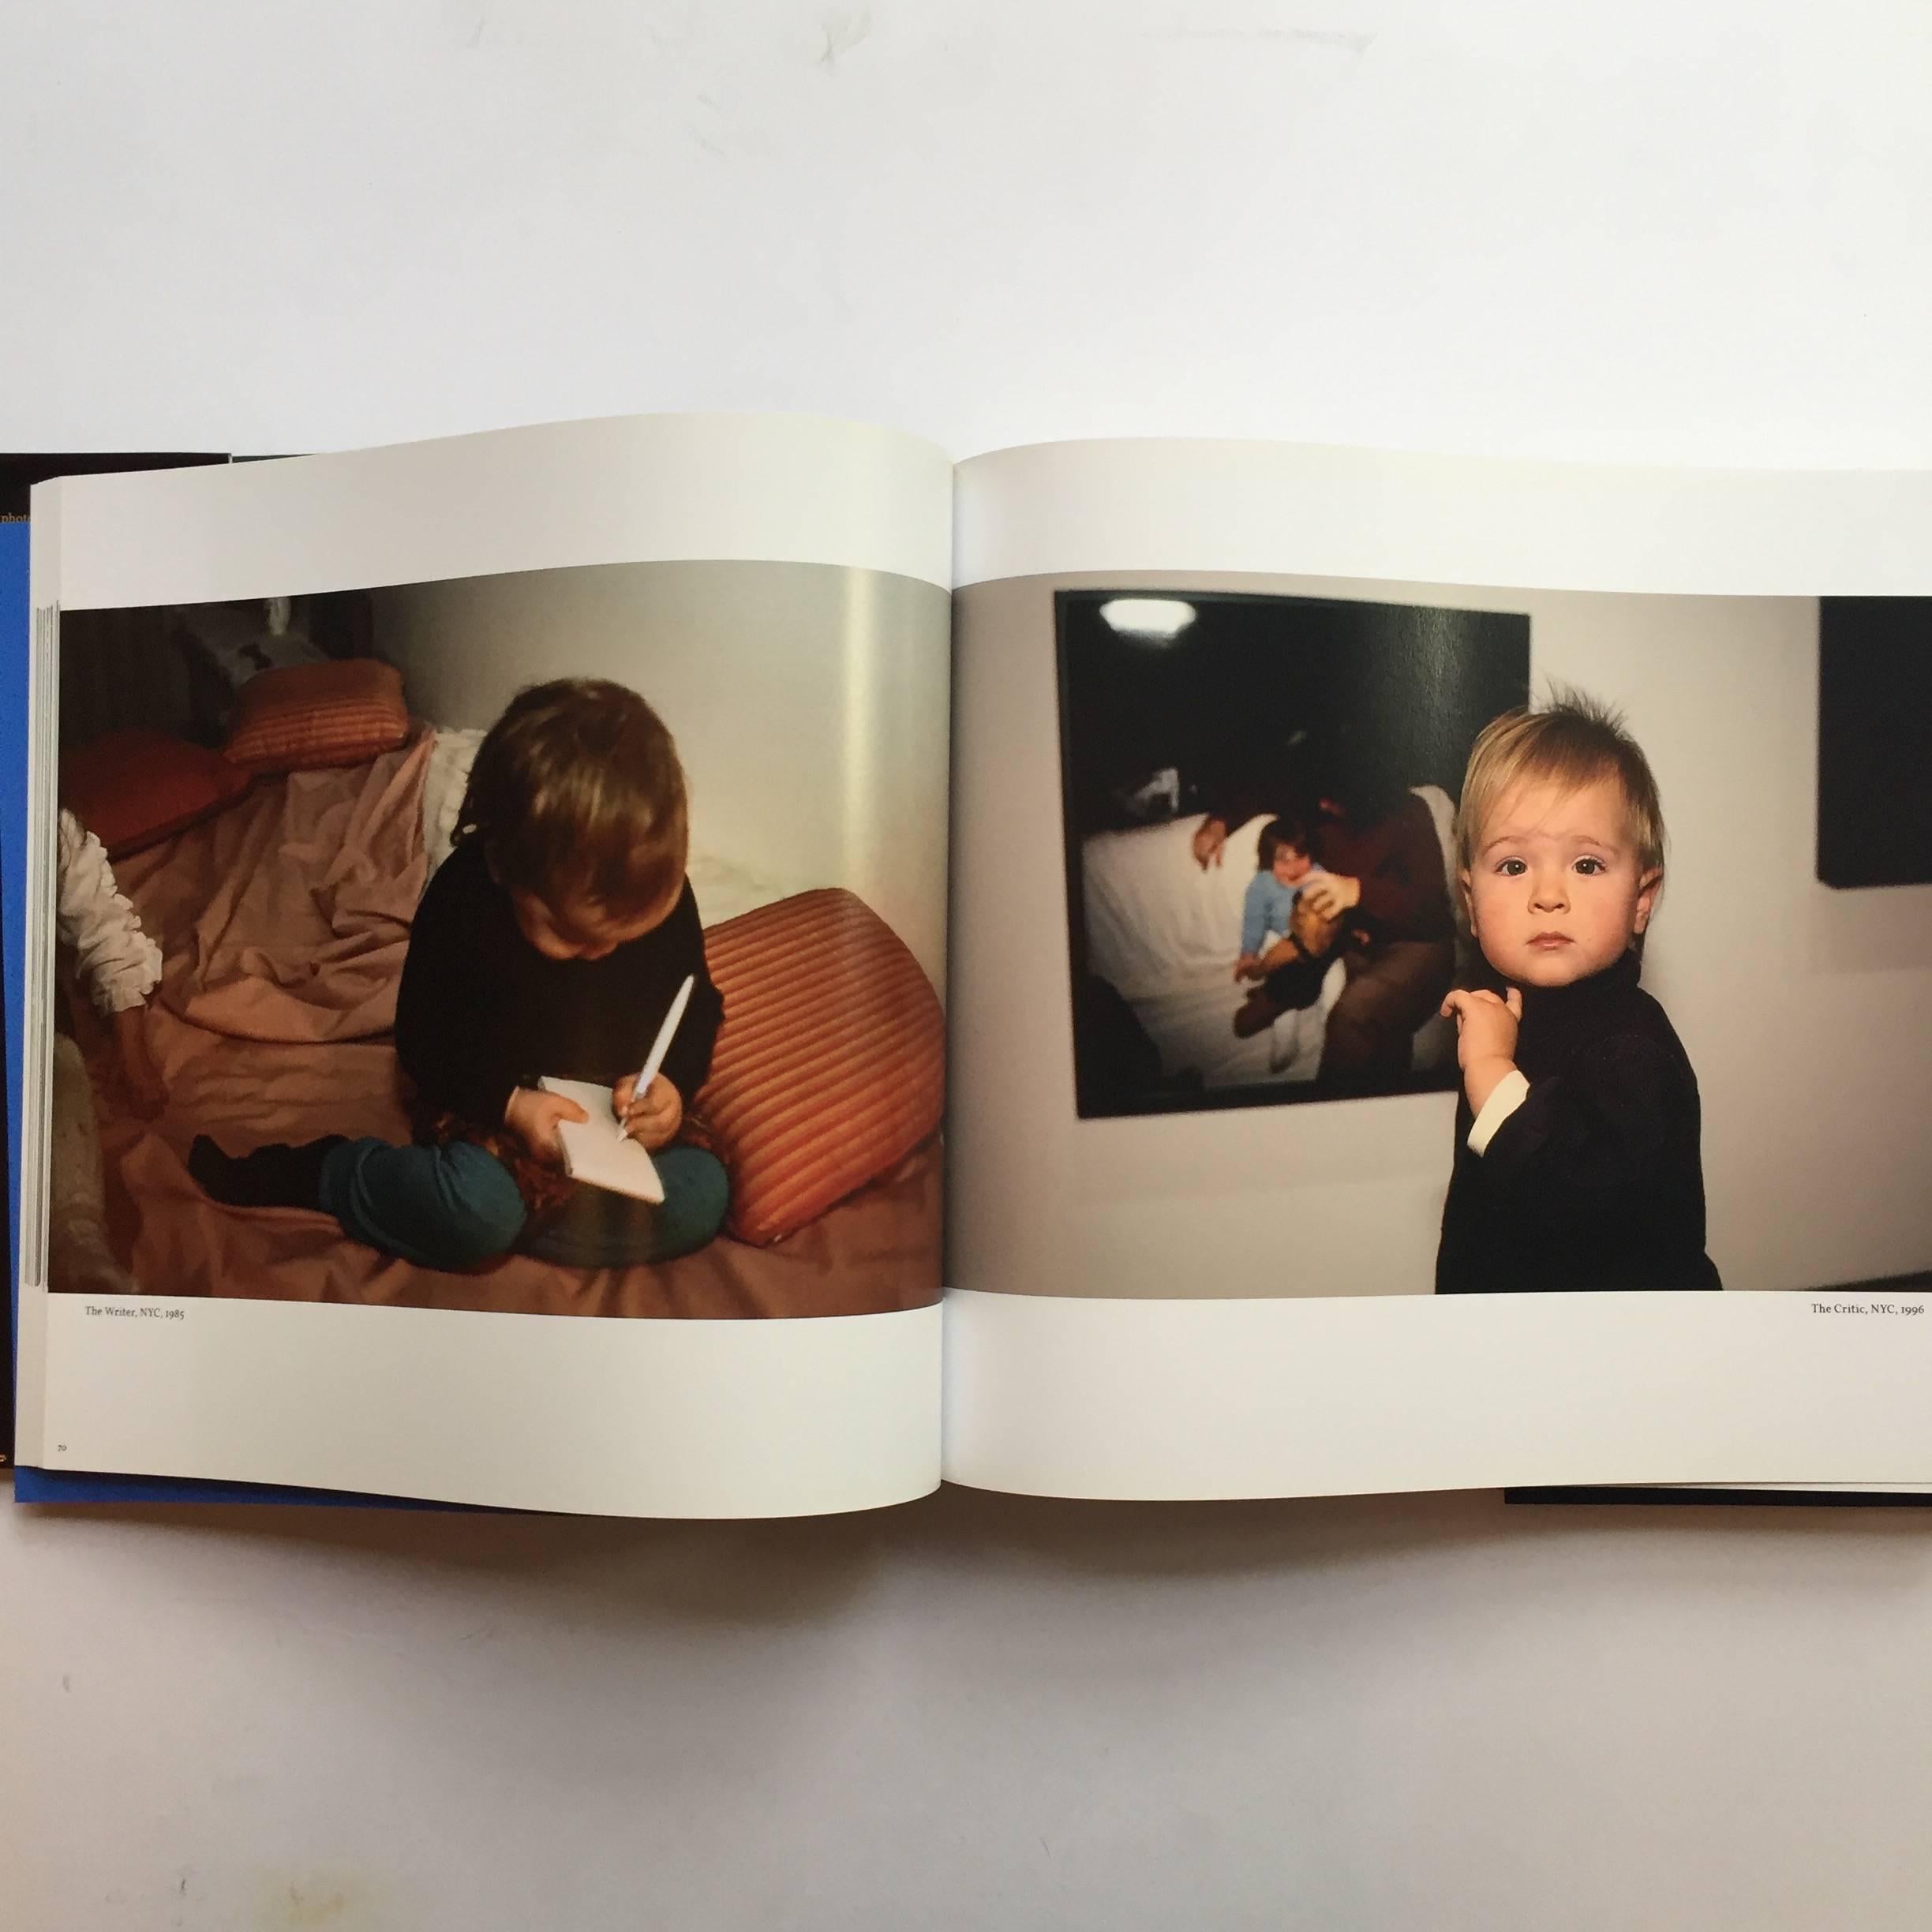 First edition, published by Phaidon, 2014.

In this collection of photographs Nan Goldin takes a softer approach than usual, with selection of several hundred photographs presenting the fleeting journey of childhood and youth from birth to young